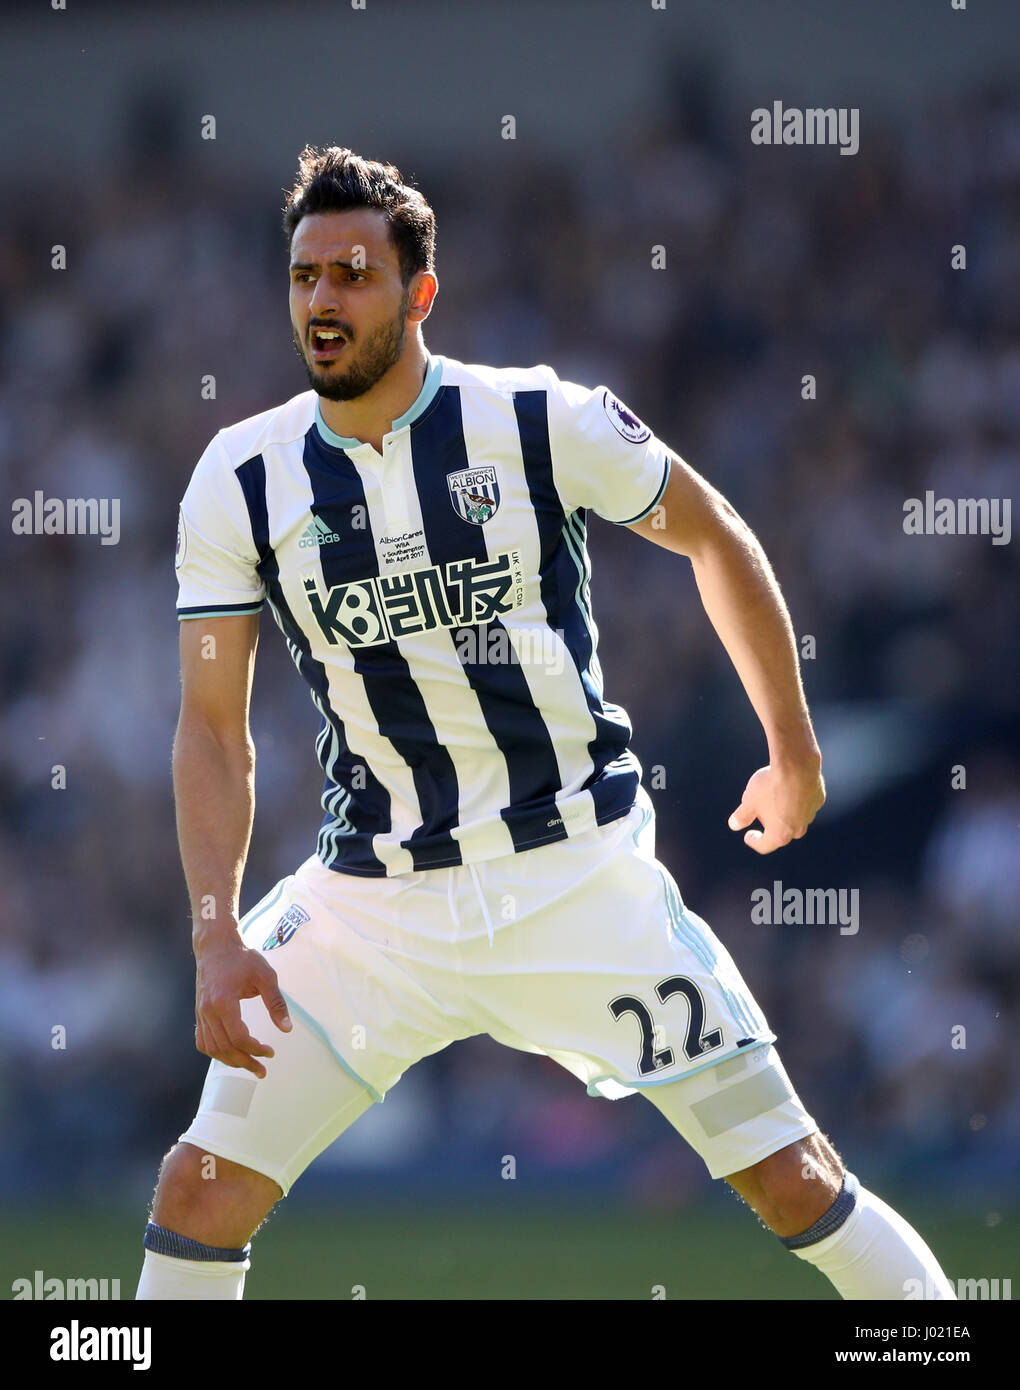 West Bromwich Albion's Nacer Chadli during the Premier League match at The Hawthorns, West Bromwich. PRESS ASSOCIATION Photo. Picture date: Saturday April 8, 2017. See PA story SOCCER West Brom. Photo credit should read: Nick Potts/PA Wire. RESTRICTIONS: EDITORIAL USE ONLY No use with unauthorised audio, video, data, fixture lists, club/league logos or 'live' services. Online in-match use limited to 75 images, no video emulation. No use in betting, games or single club/league/player publications Stock Photo